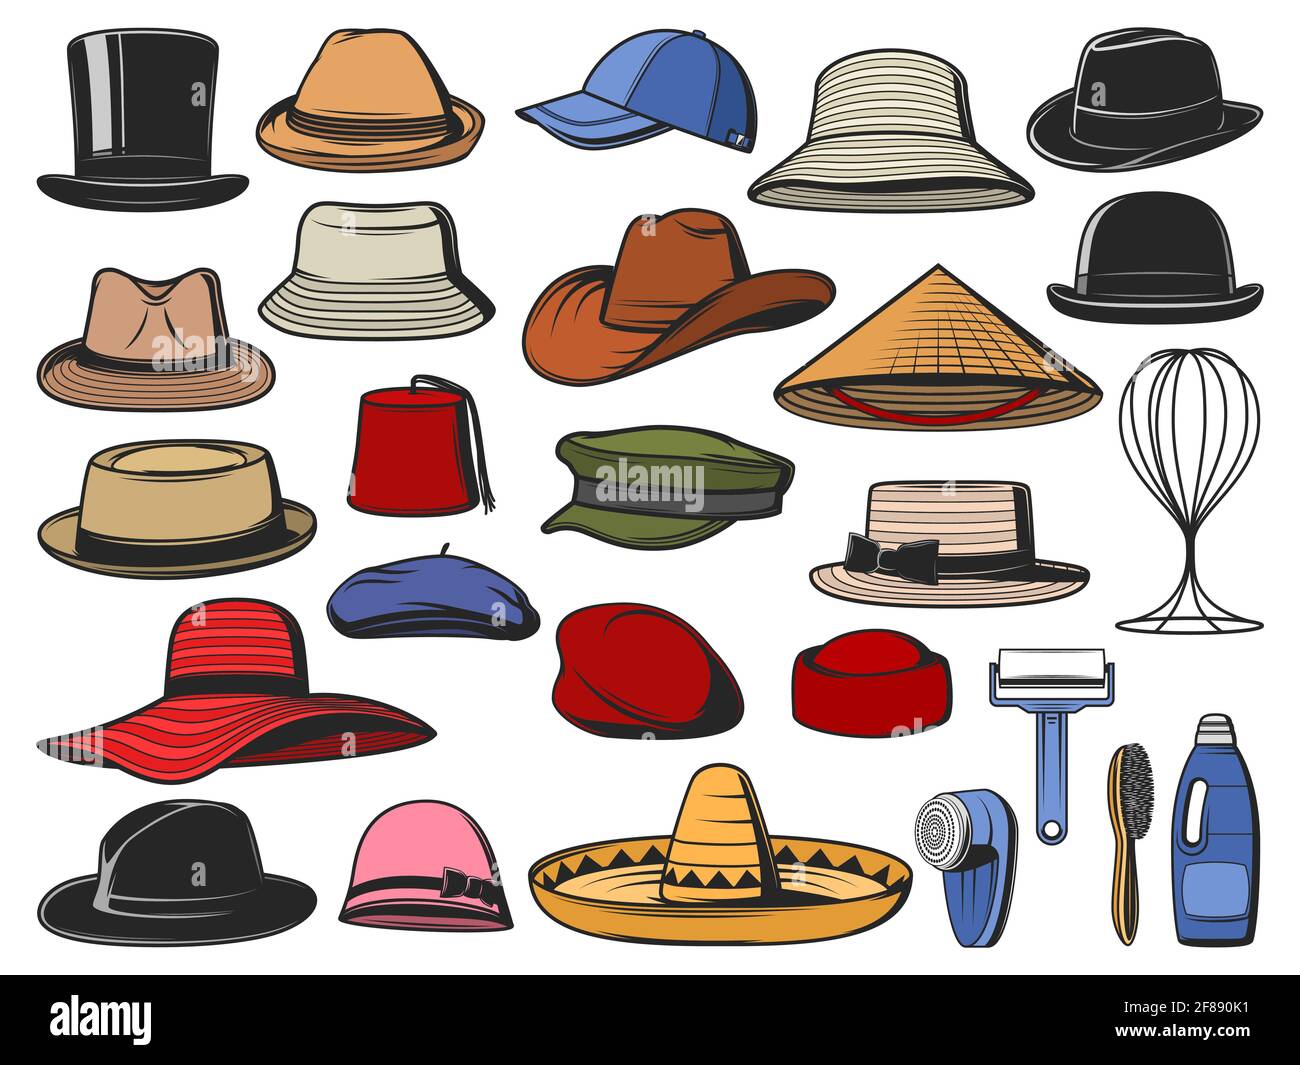 Hats and caps vector. Man and woman headwear icons. Cowboy, Asian straw and cylinder hats, beret, bowler, fedora and beanie, baseball cap, sombrero, c Stock Vector